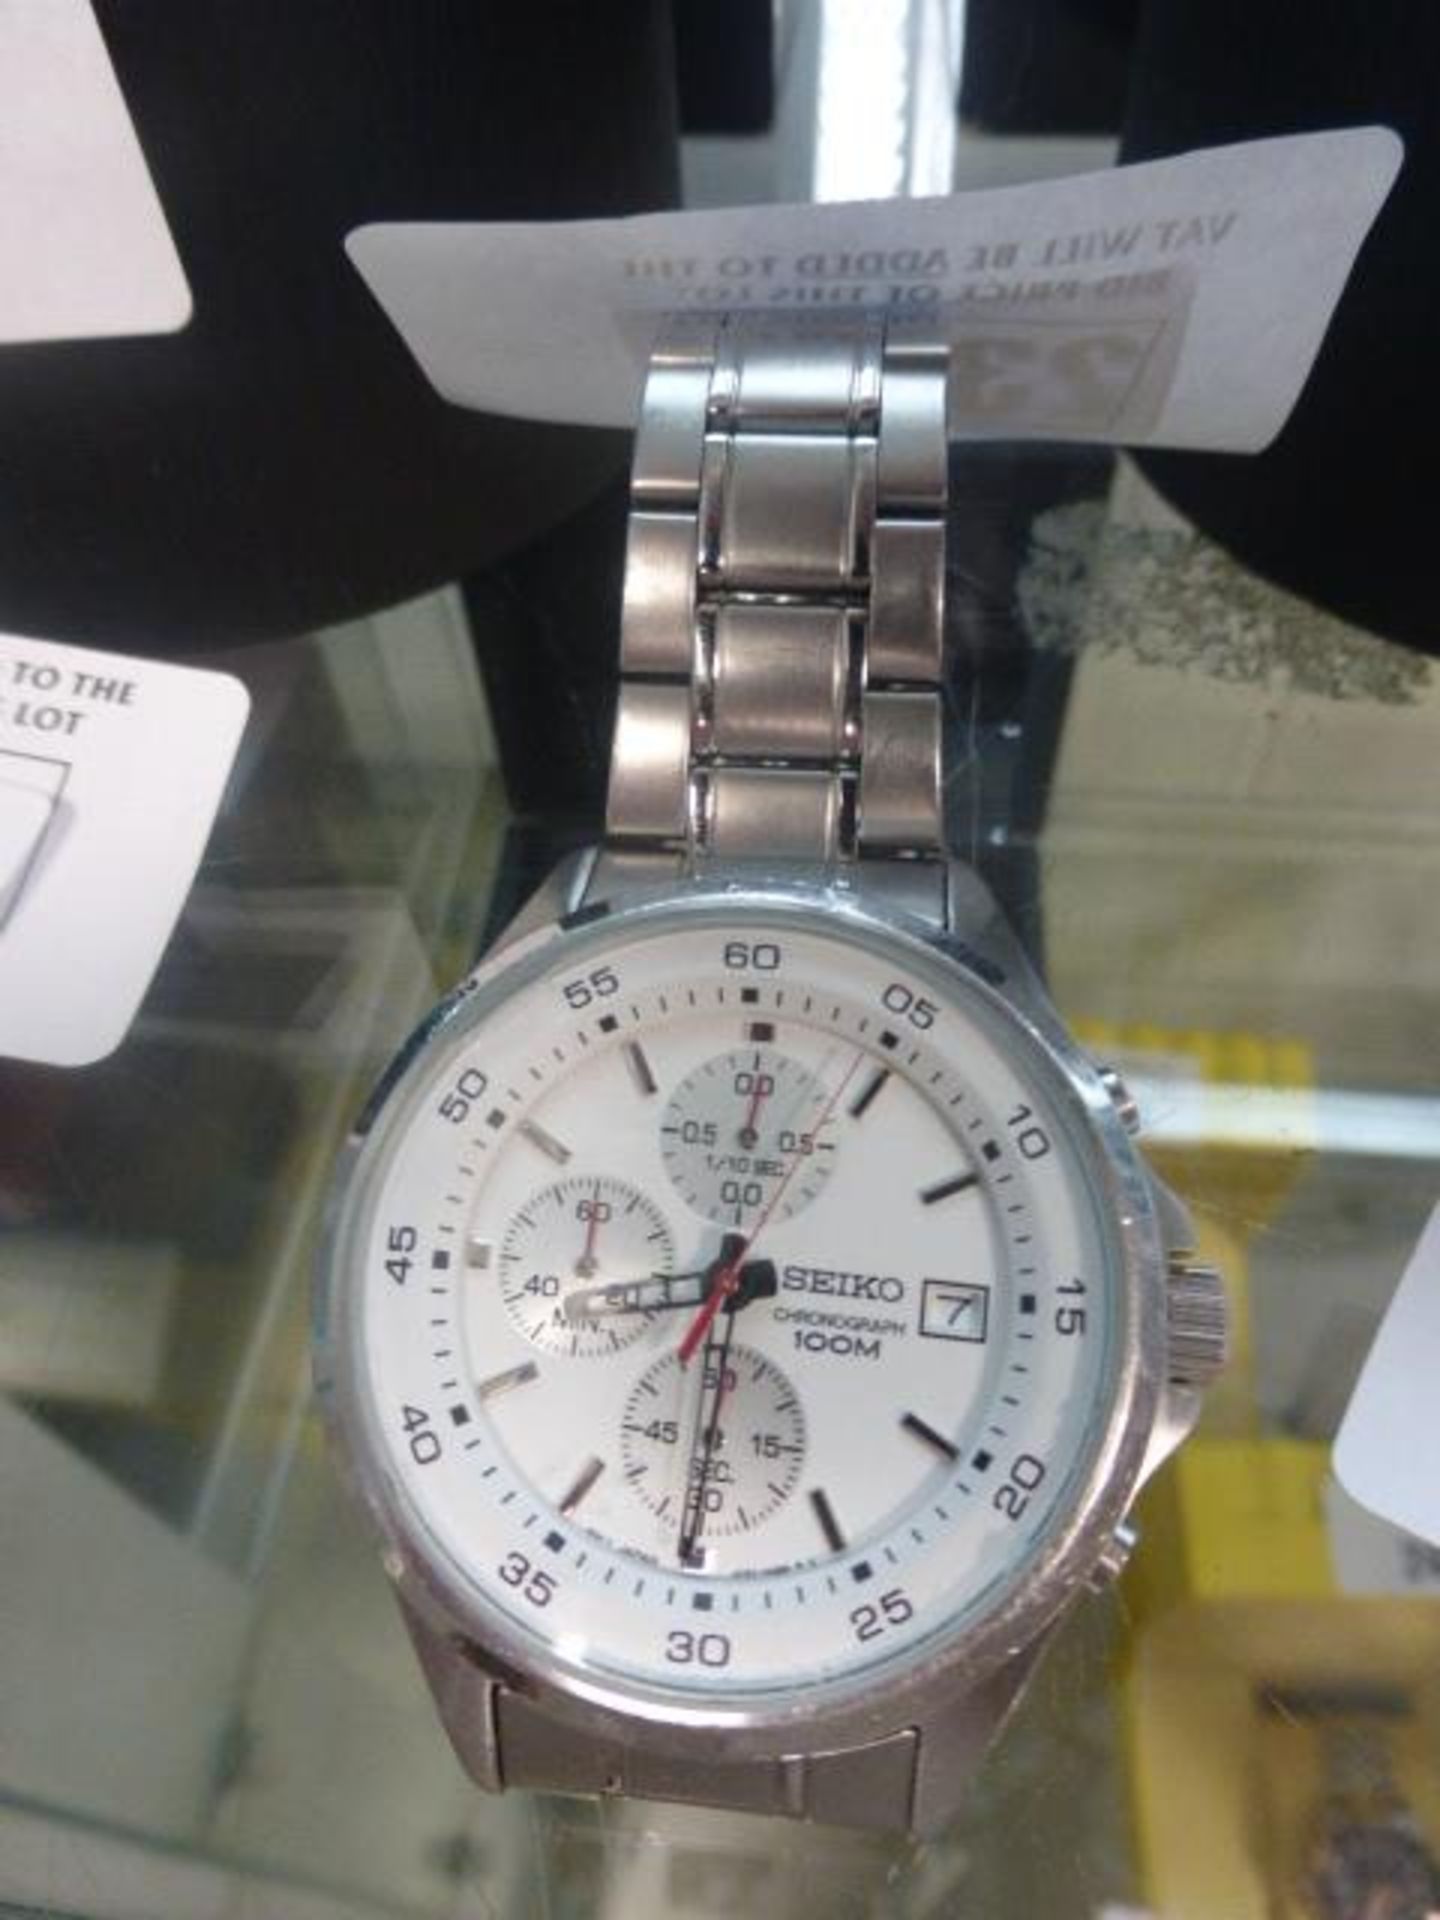 Seiko chronograph white faced dial wristwatch with stainless steel strap